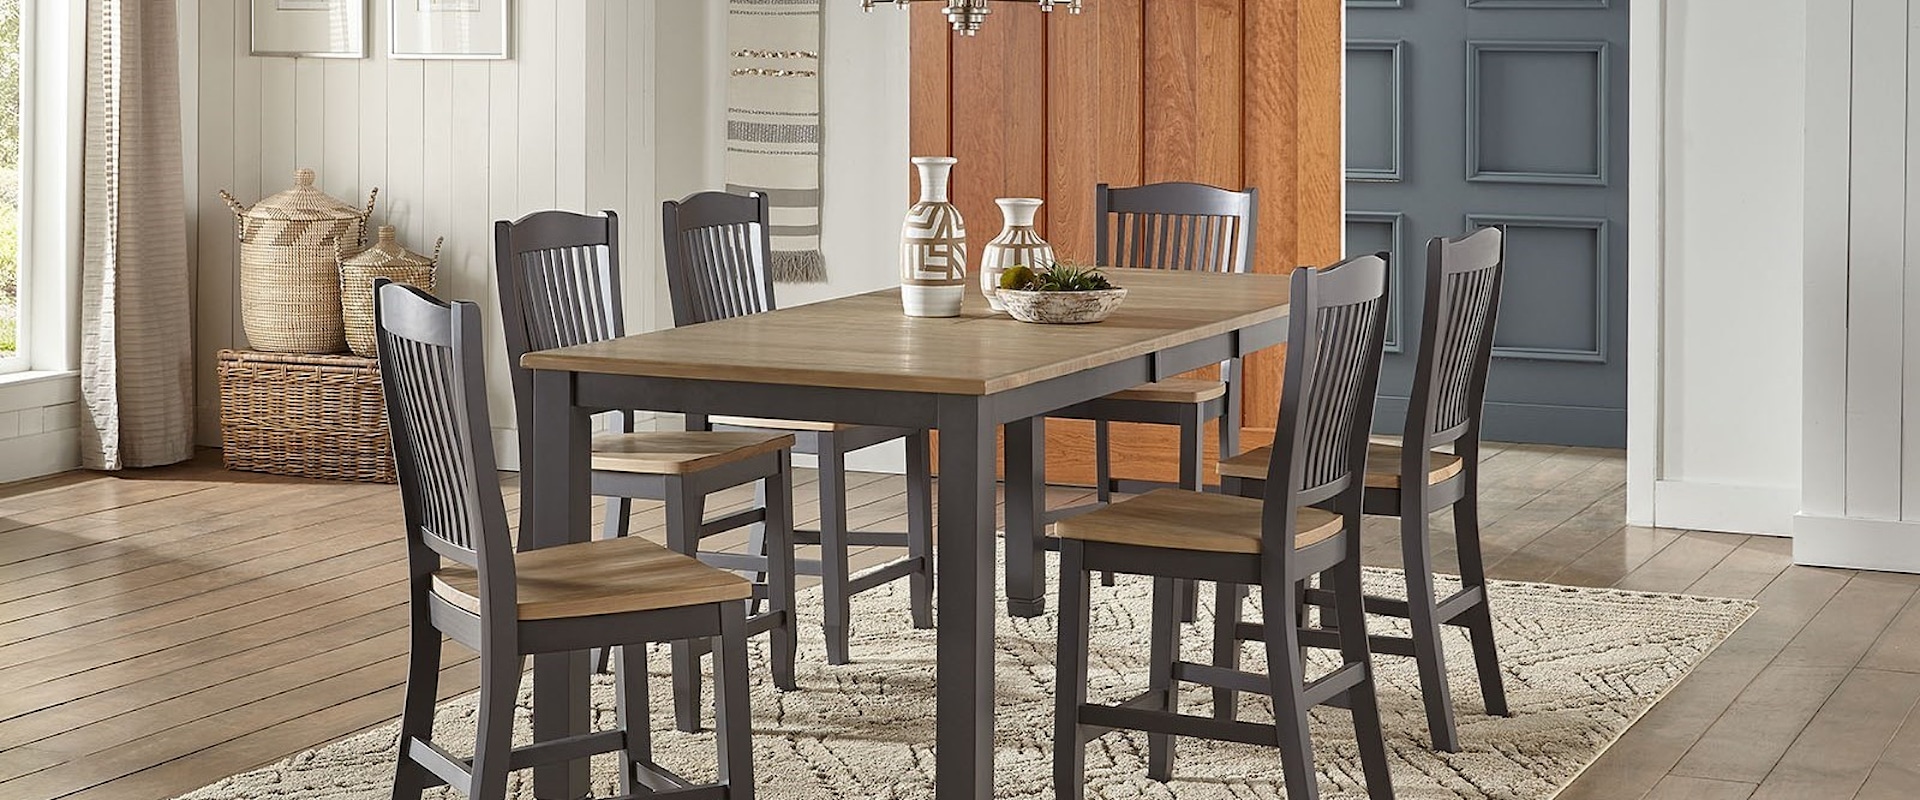 7-Piece Rectangular Gathering Height Table and Chair Set with Leaf